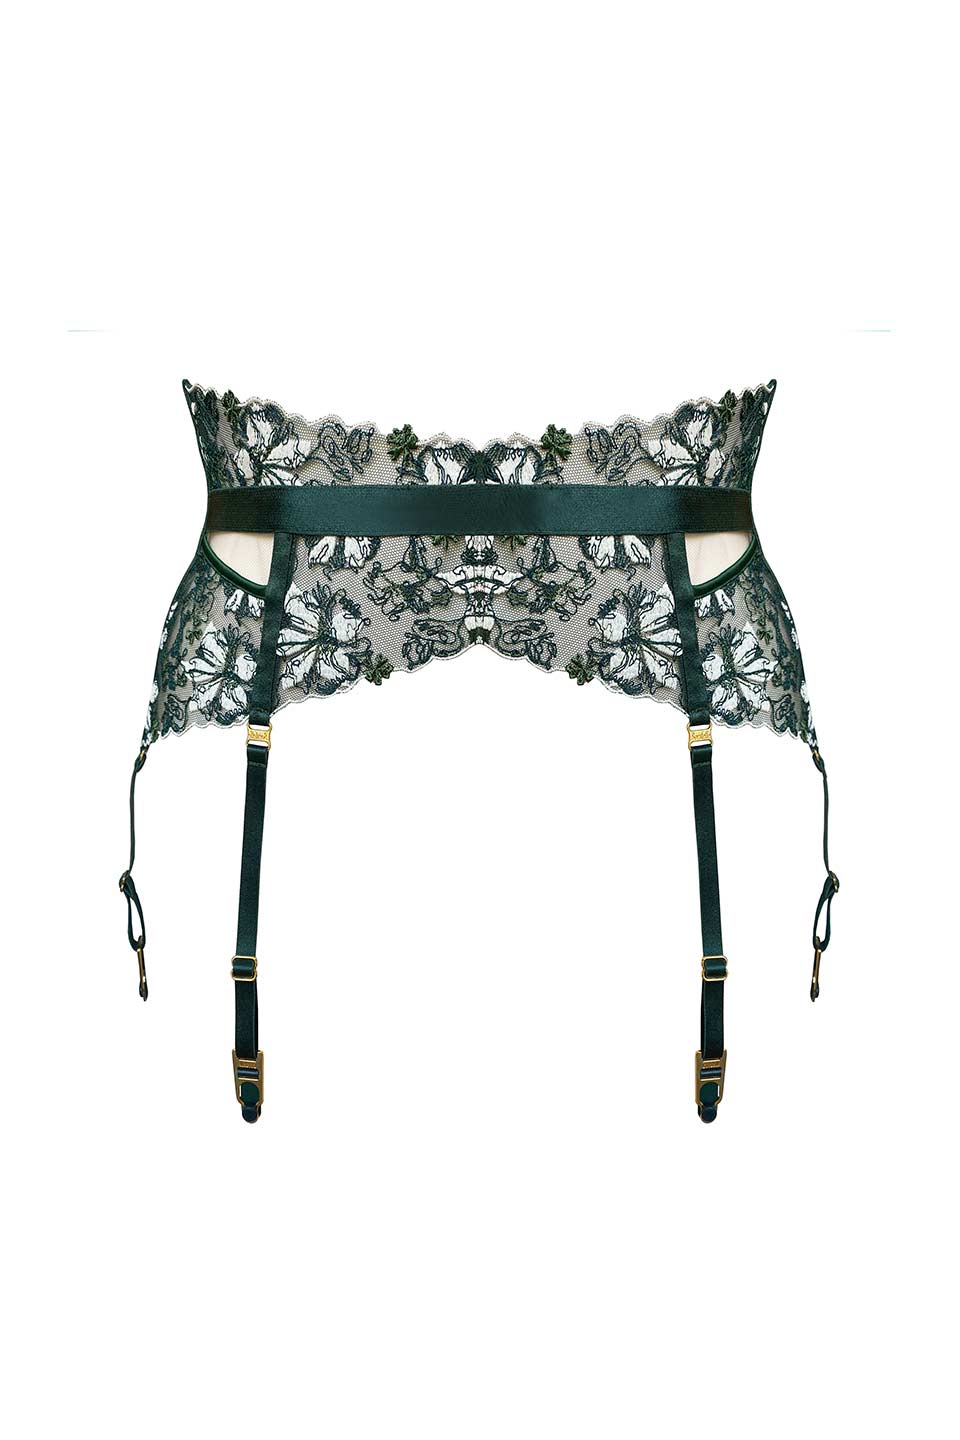 Shop online trendy Green Lingerie accessories from Atelier Bordelle Fashion designer. Product gallery 1